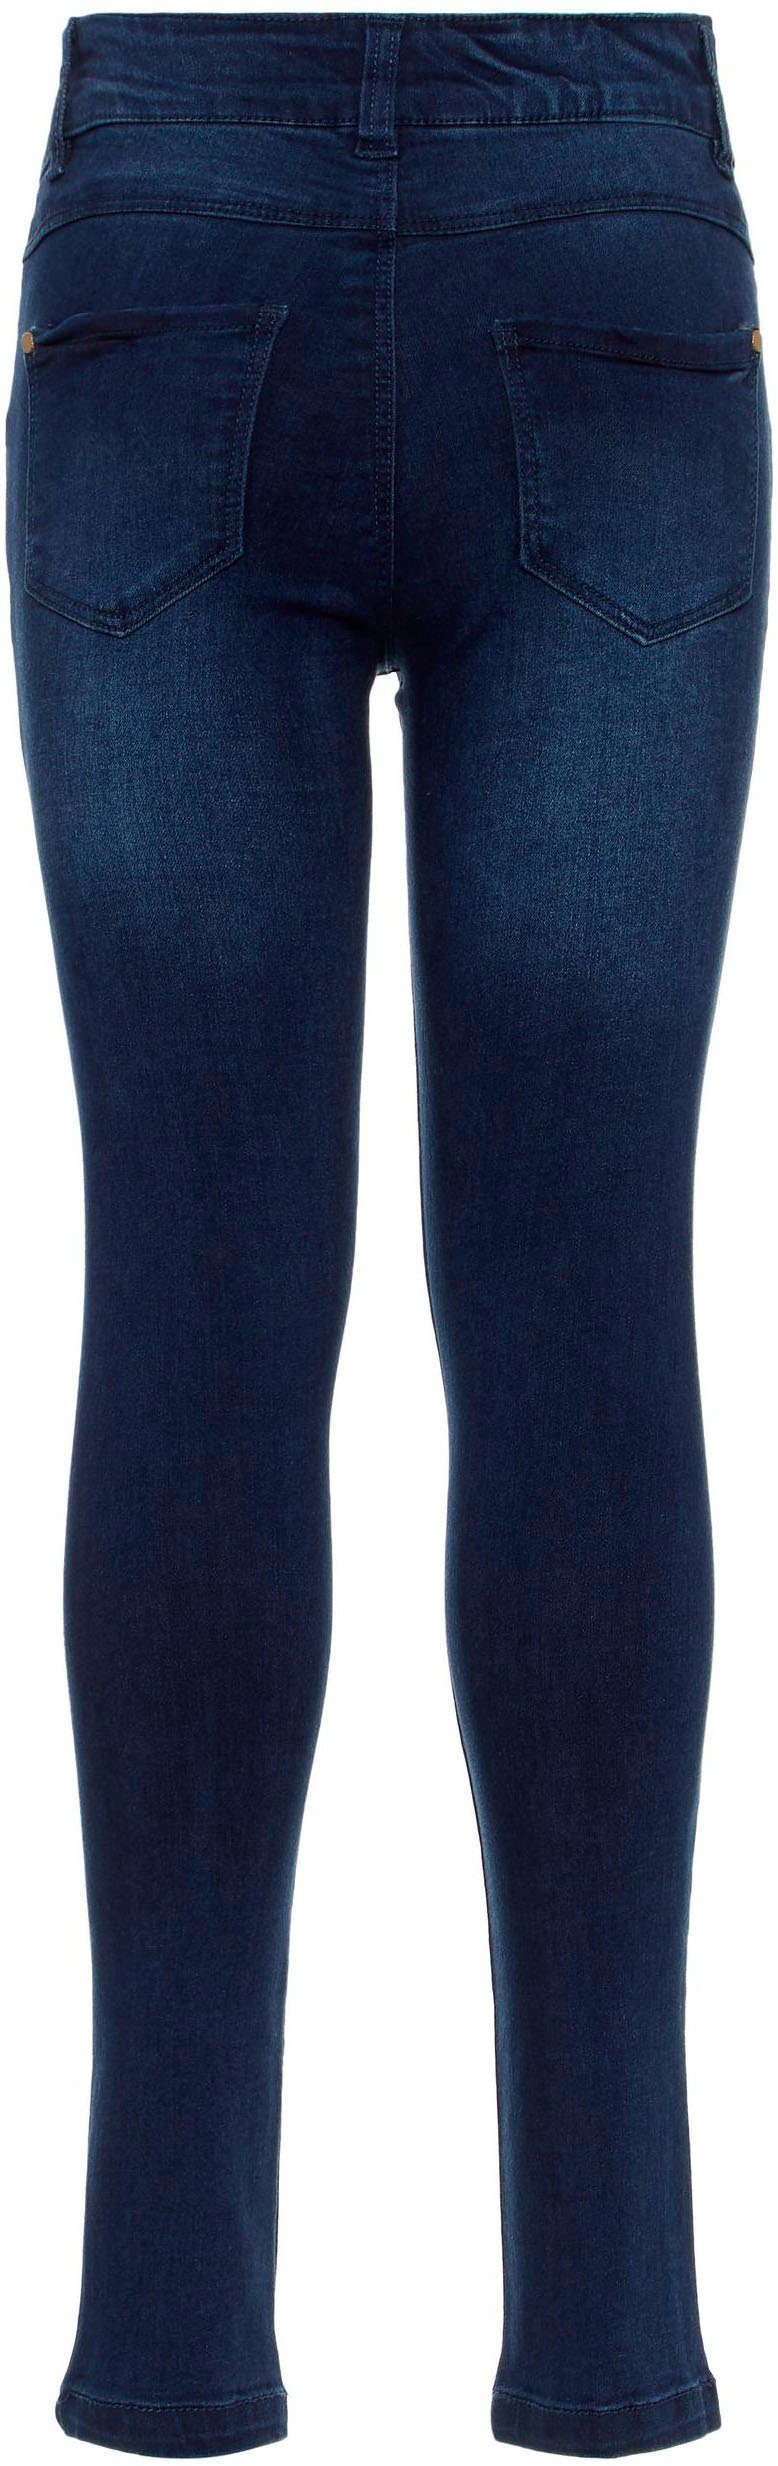 Name It Passform NKFPOLLY Stretch-Jeans in schmaler